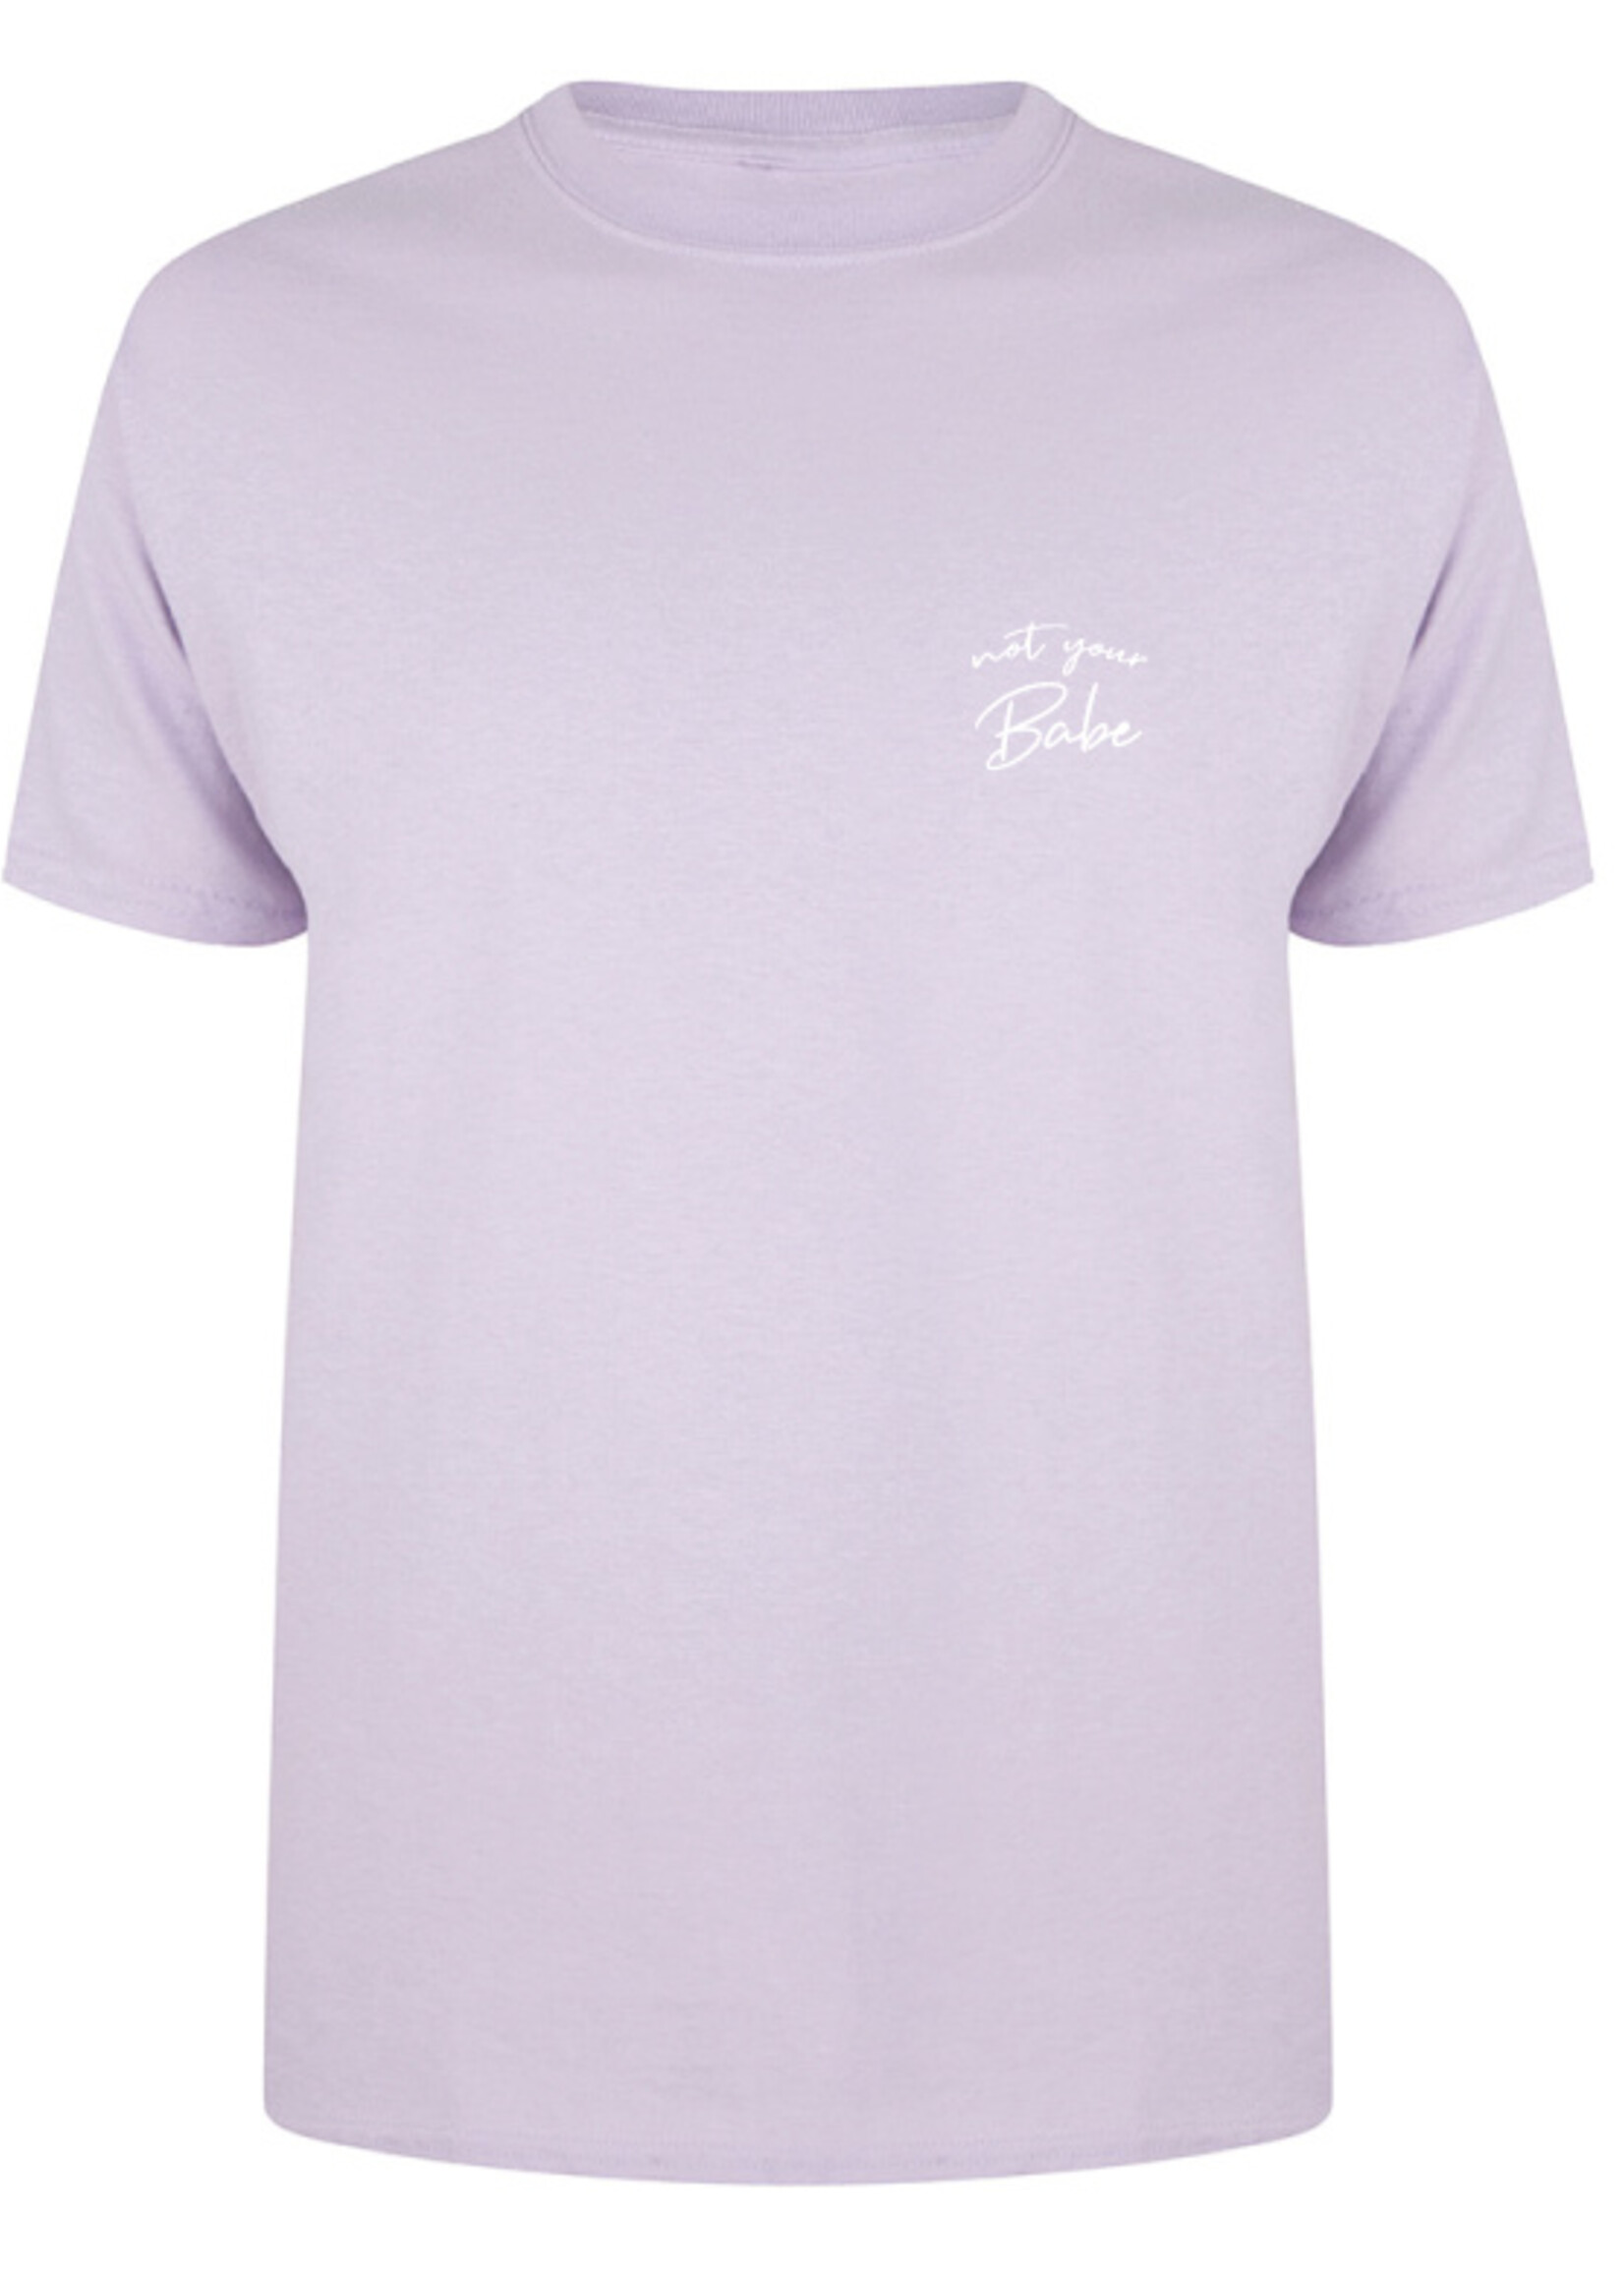 NOT YOUR BABE TEE SOFT LILAC